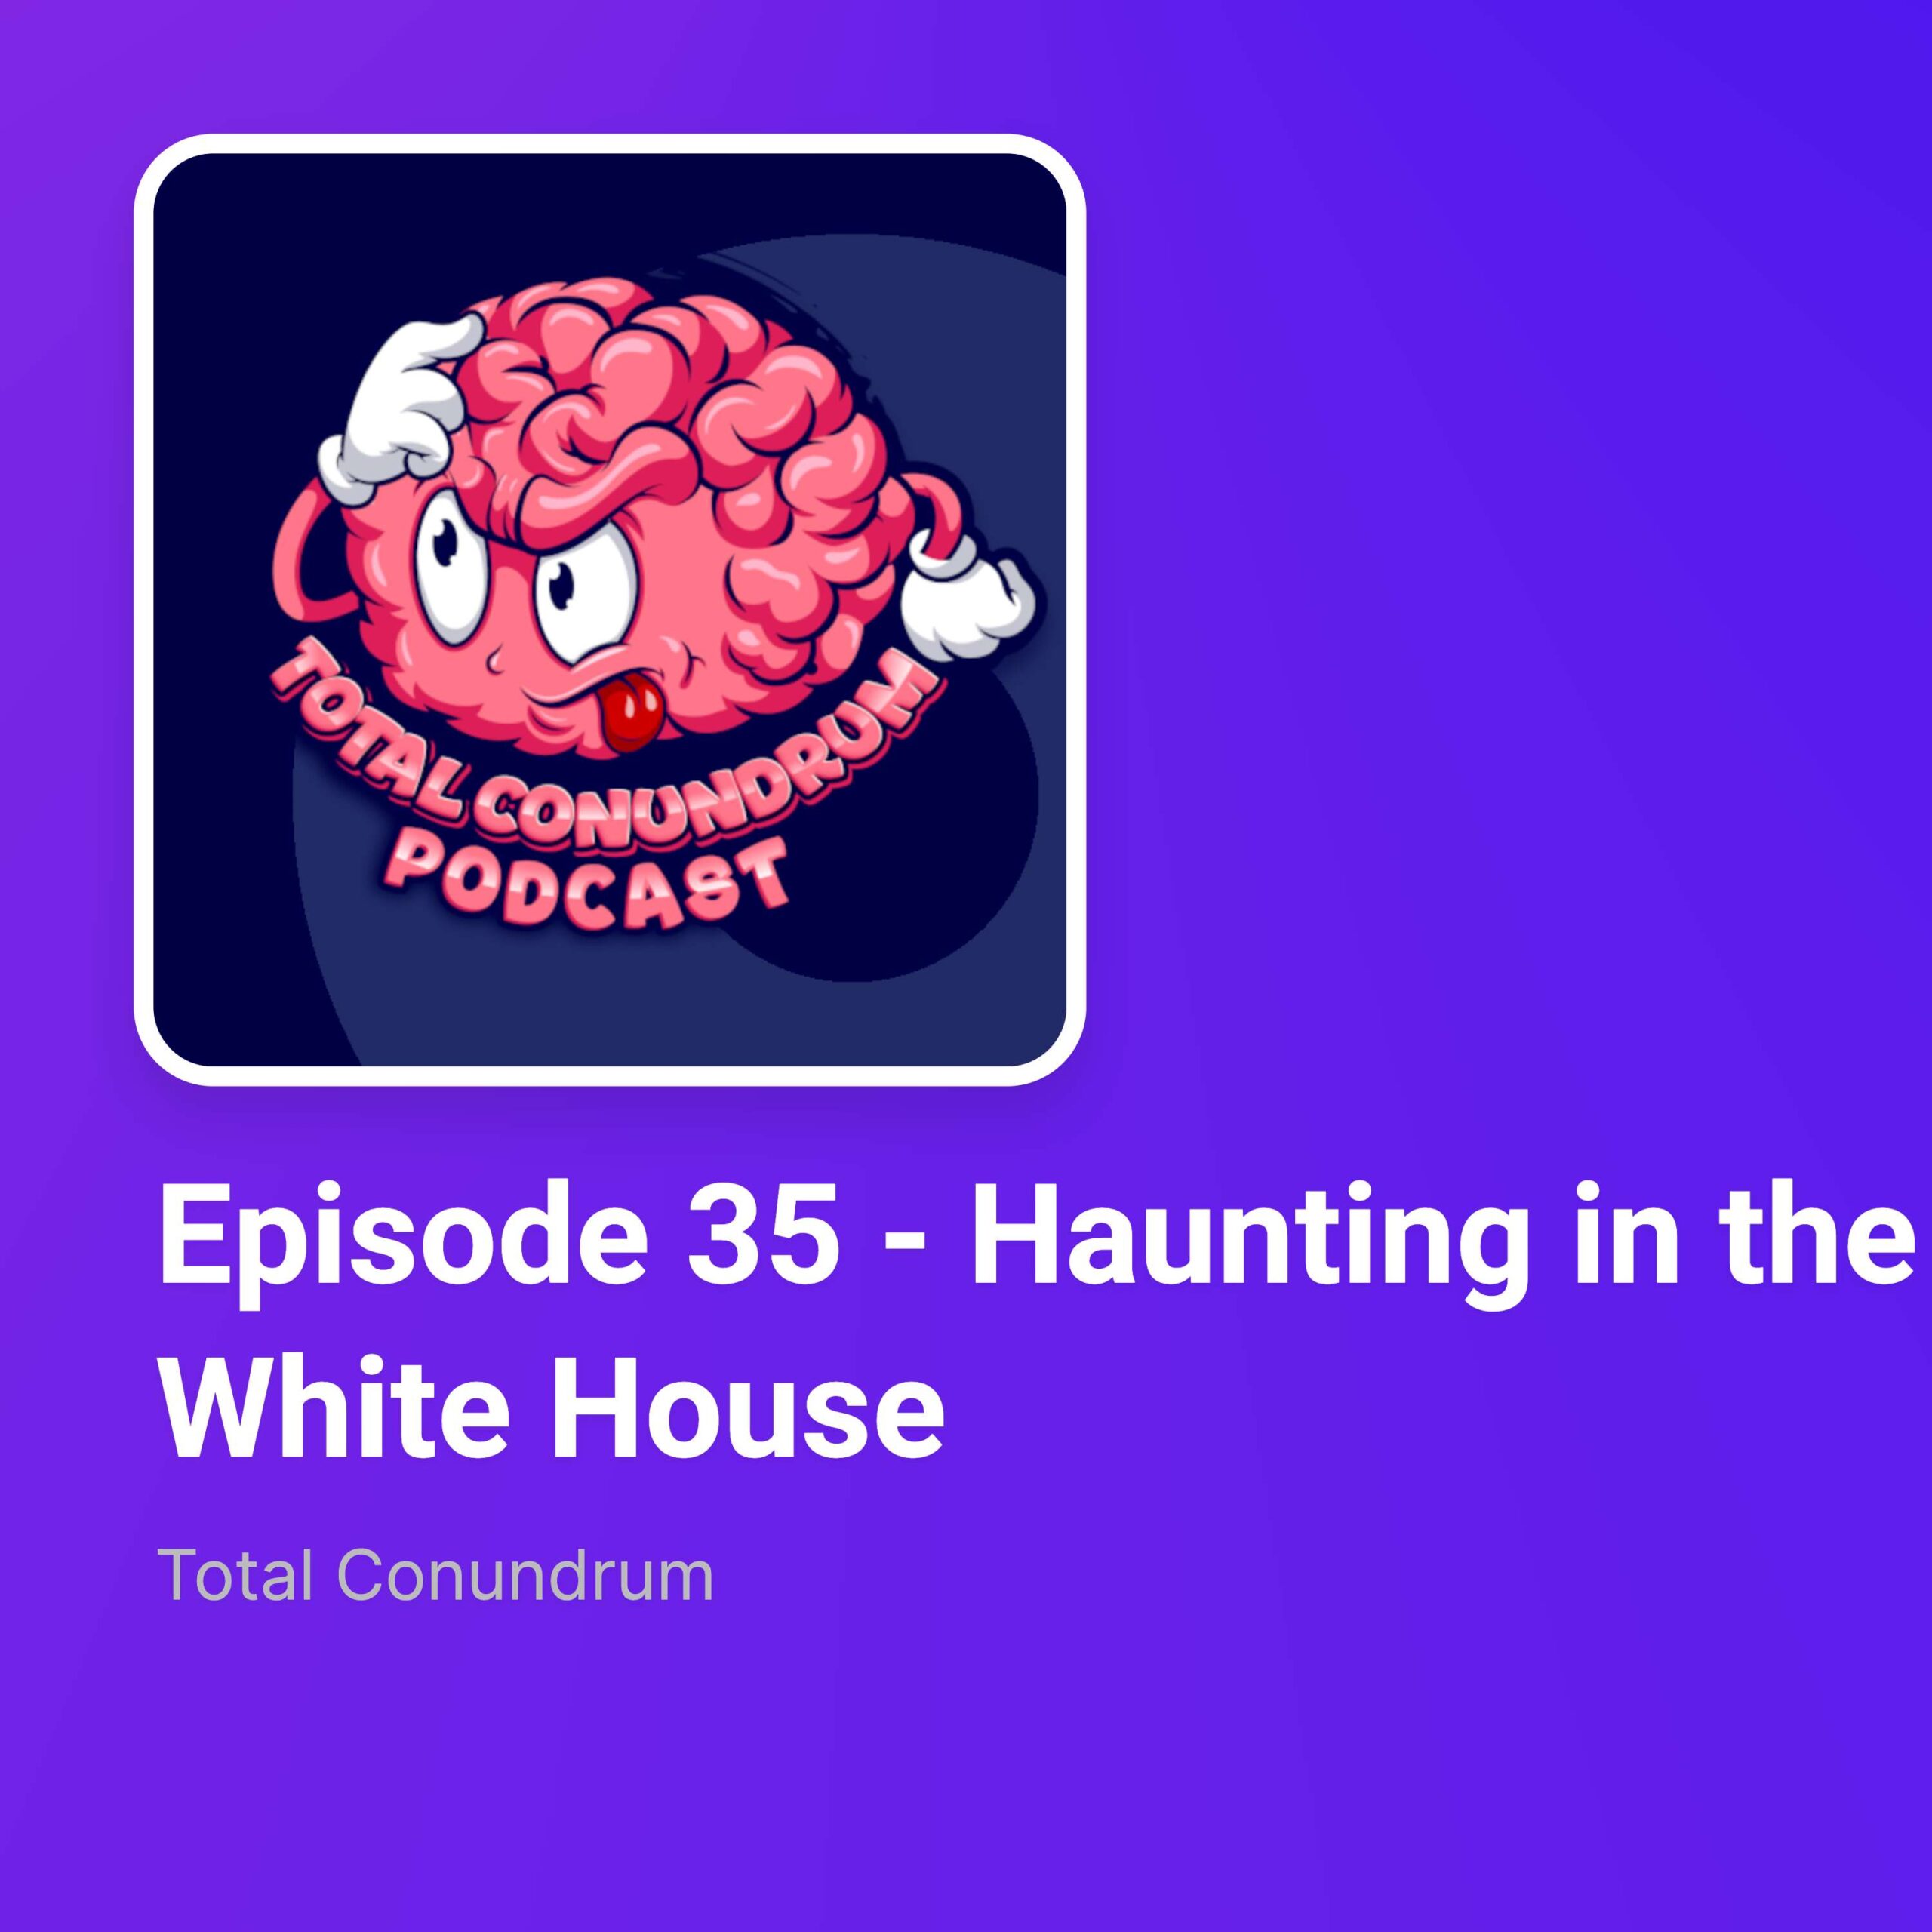 Episode 35 - Haunting in the White House